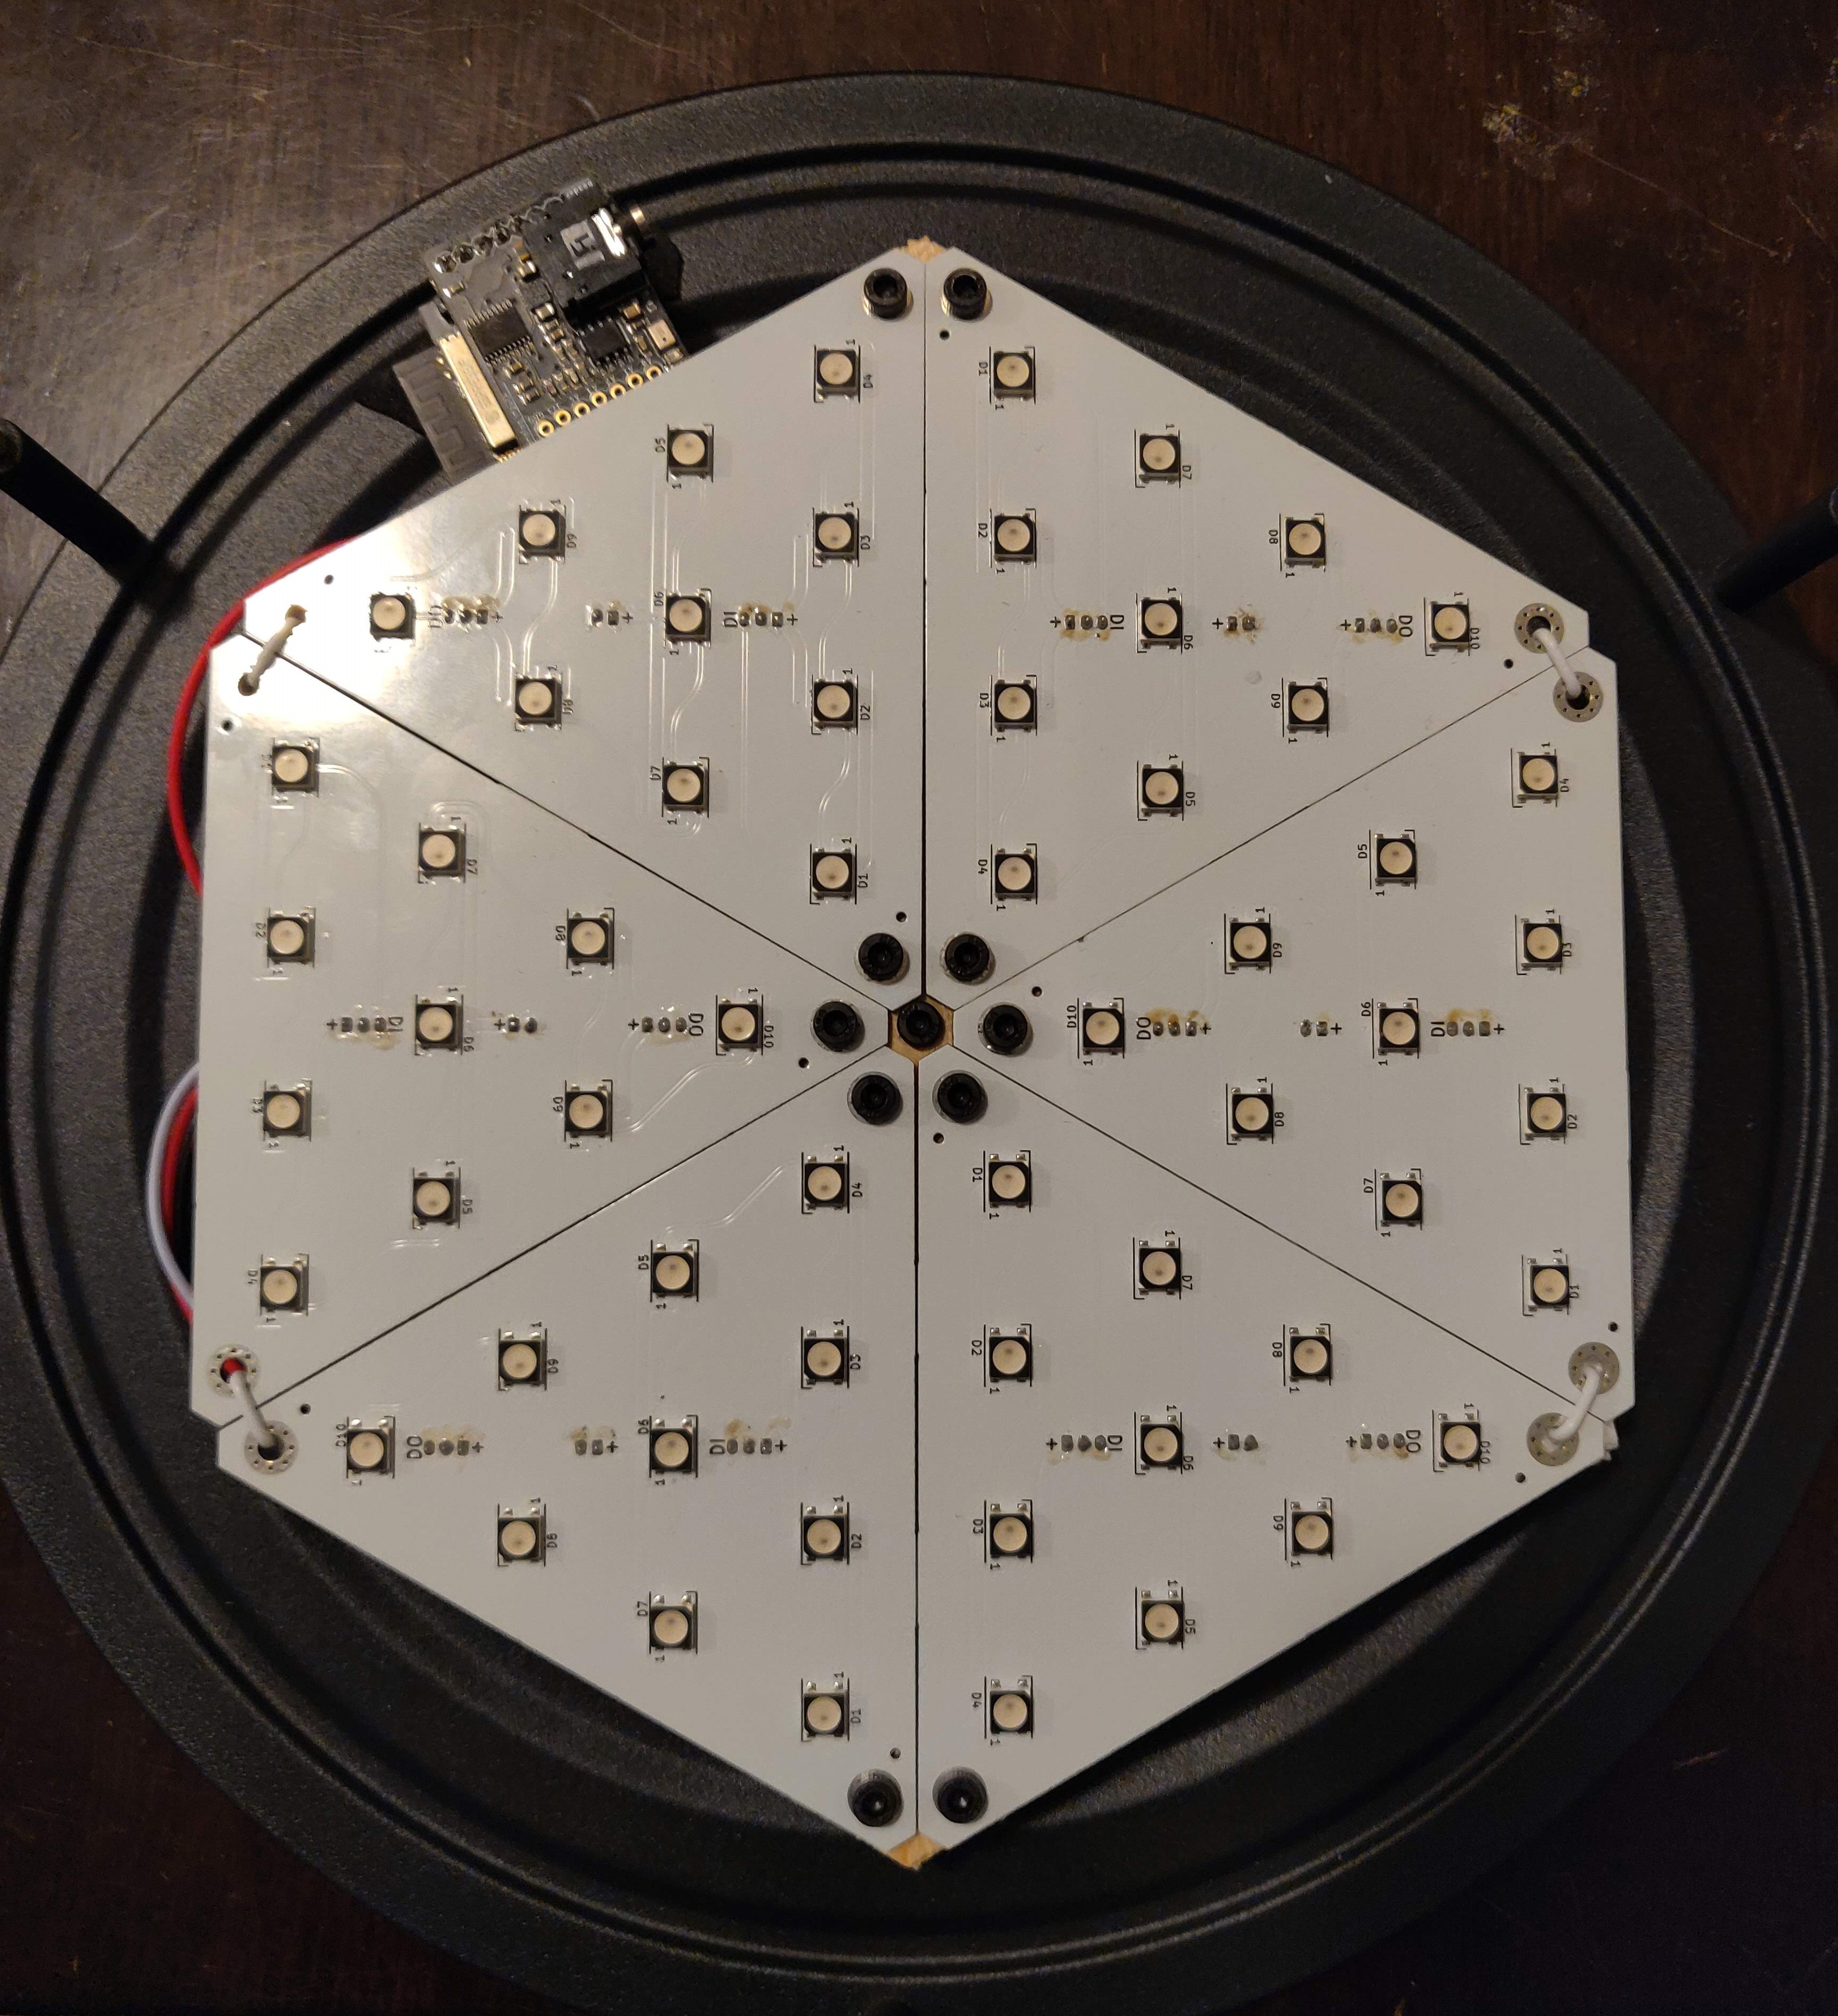 inside the small porthole - 6 LED triangles in a hexagonal array